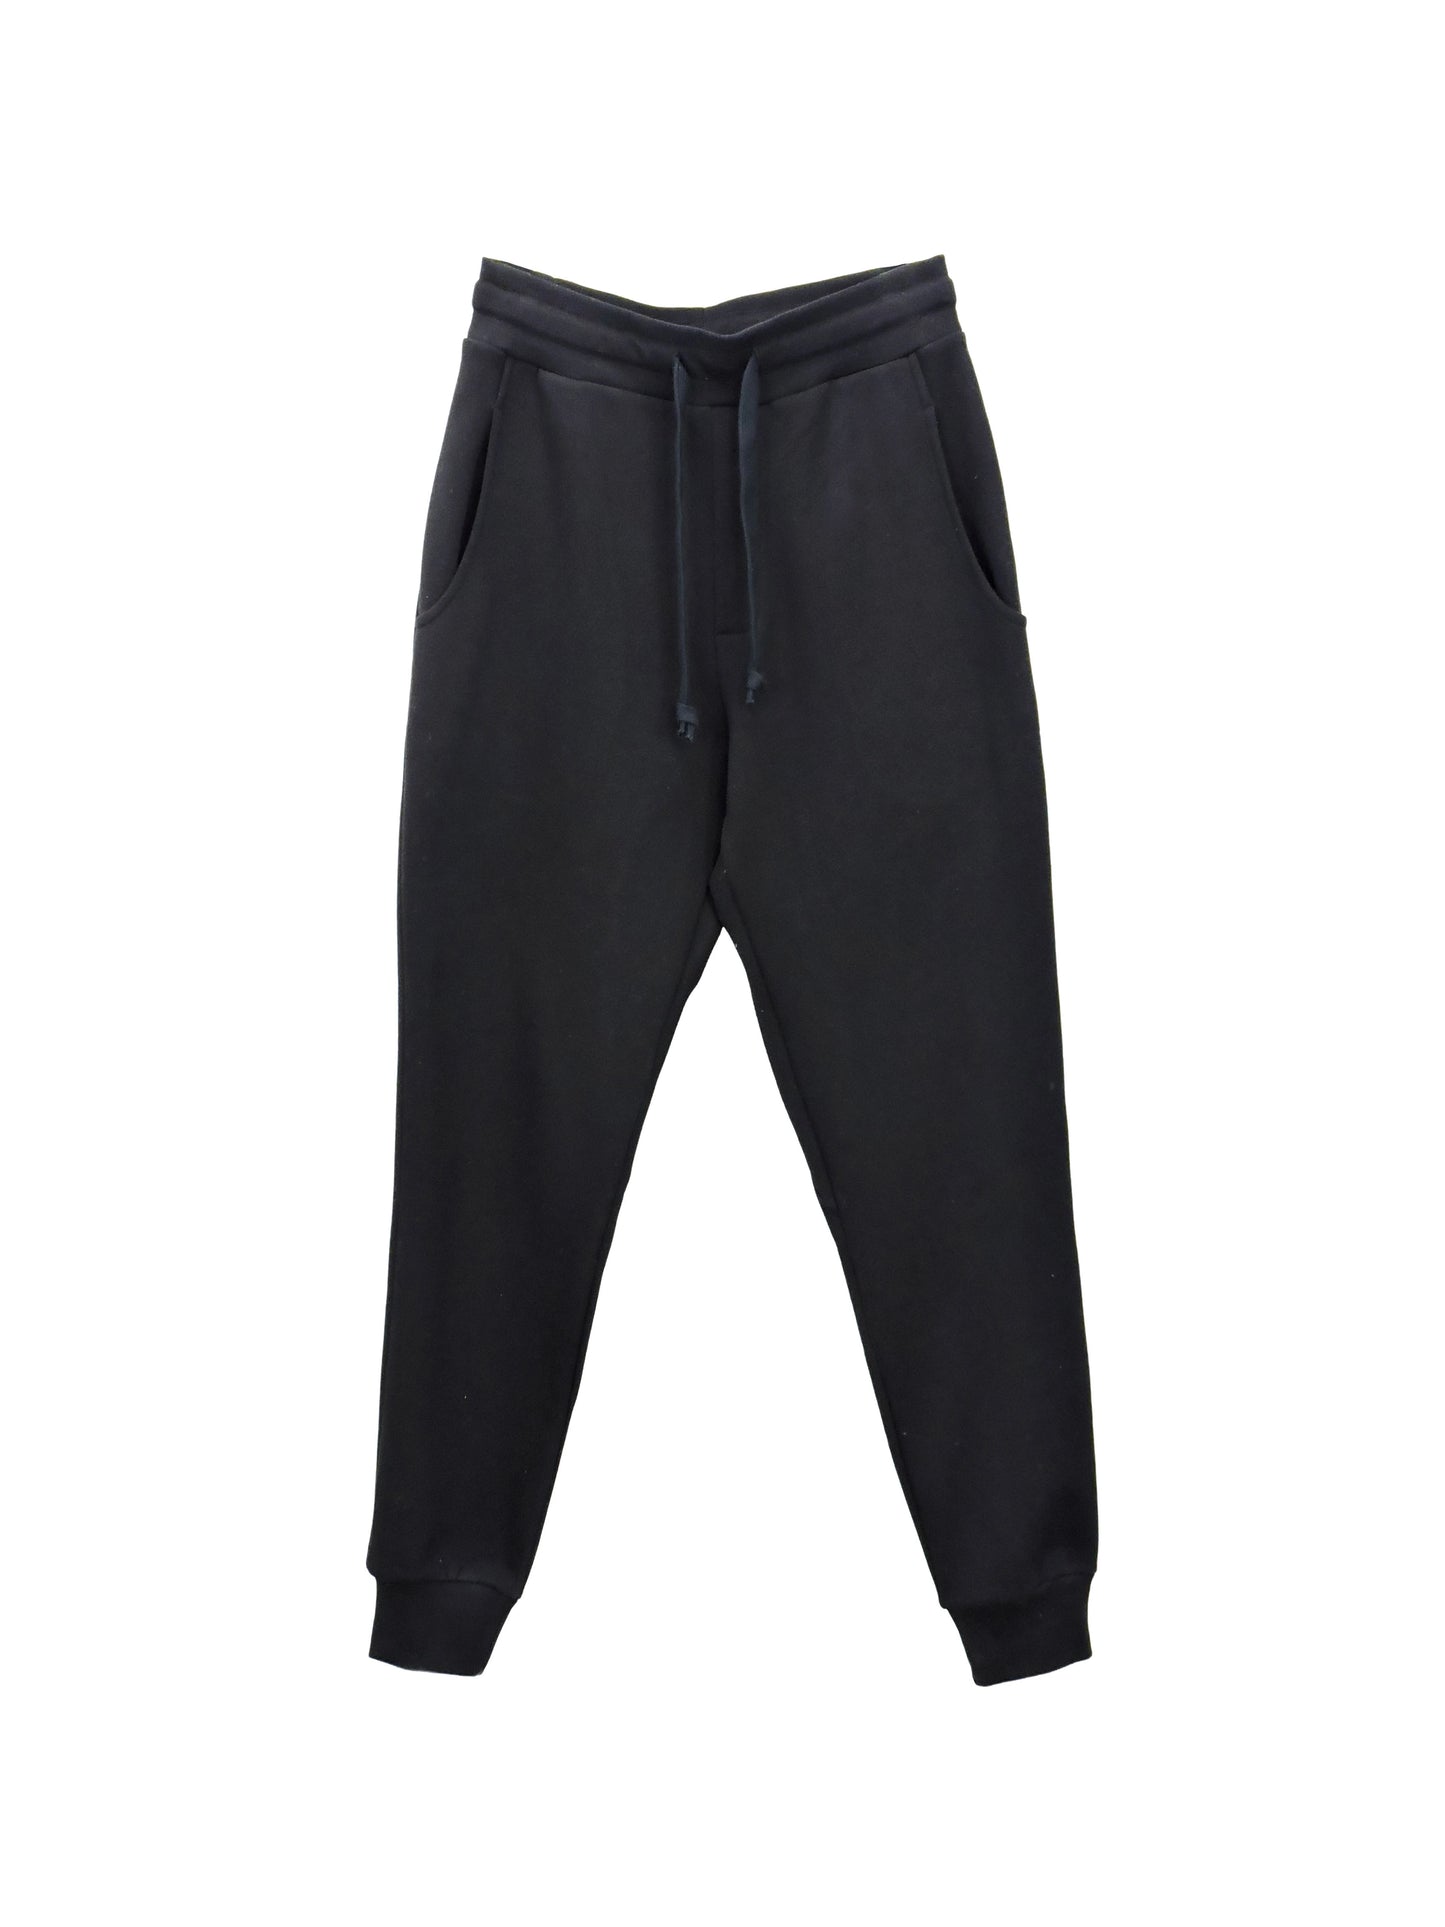 Soft Black Joggers featuring ribbed ankles and blended black drawstrings.